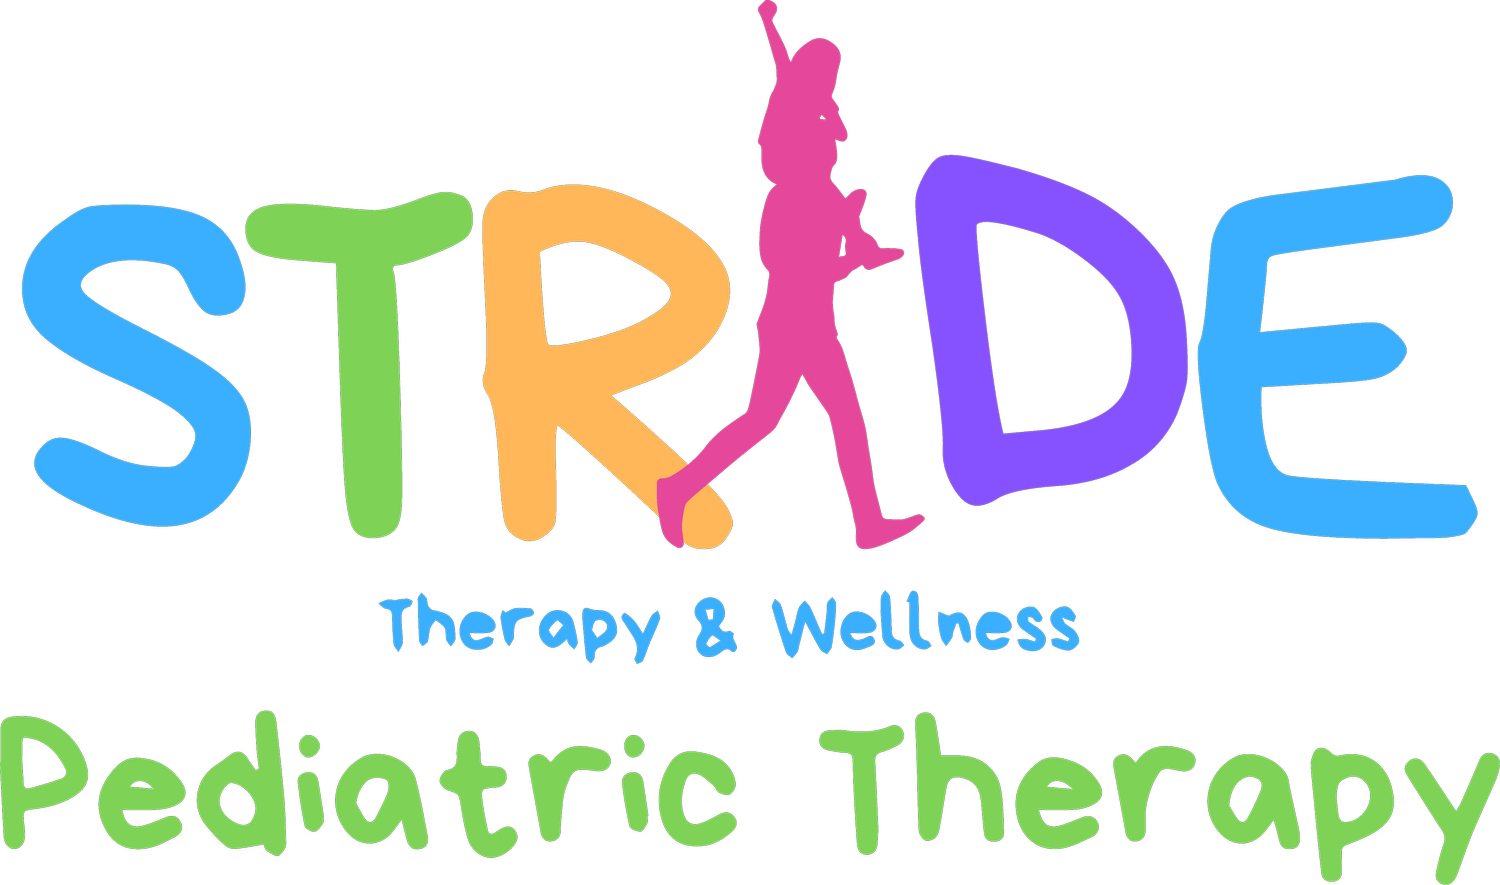 Stride Therapy and Wellness - St. Louis. MO